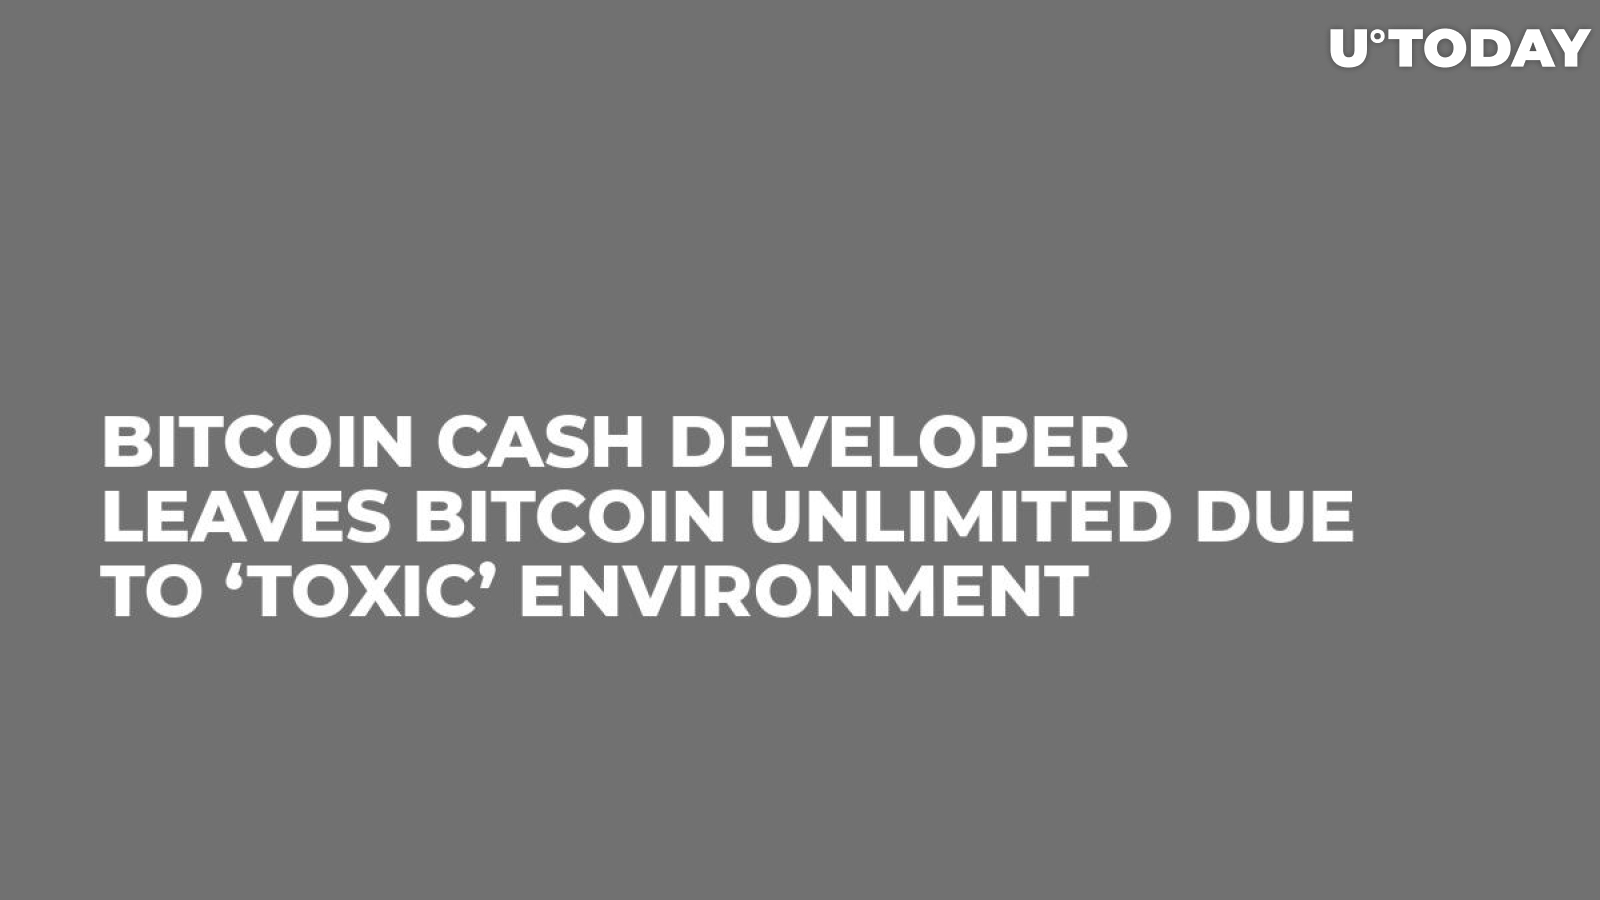 Bitcoin Cash Developer Leaves Bitcoin Unlimited Due to ‘Toxic’ Environment  